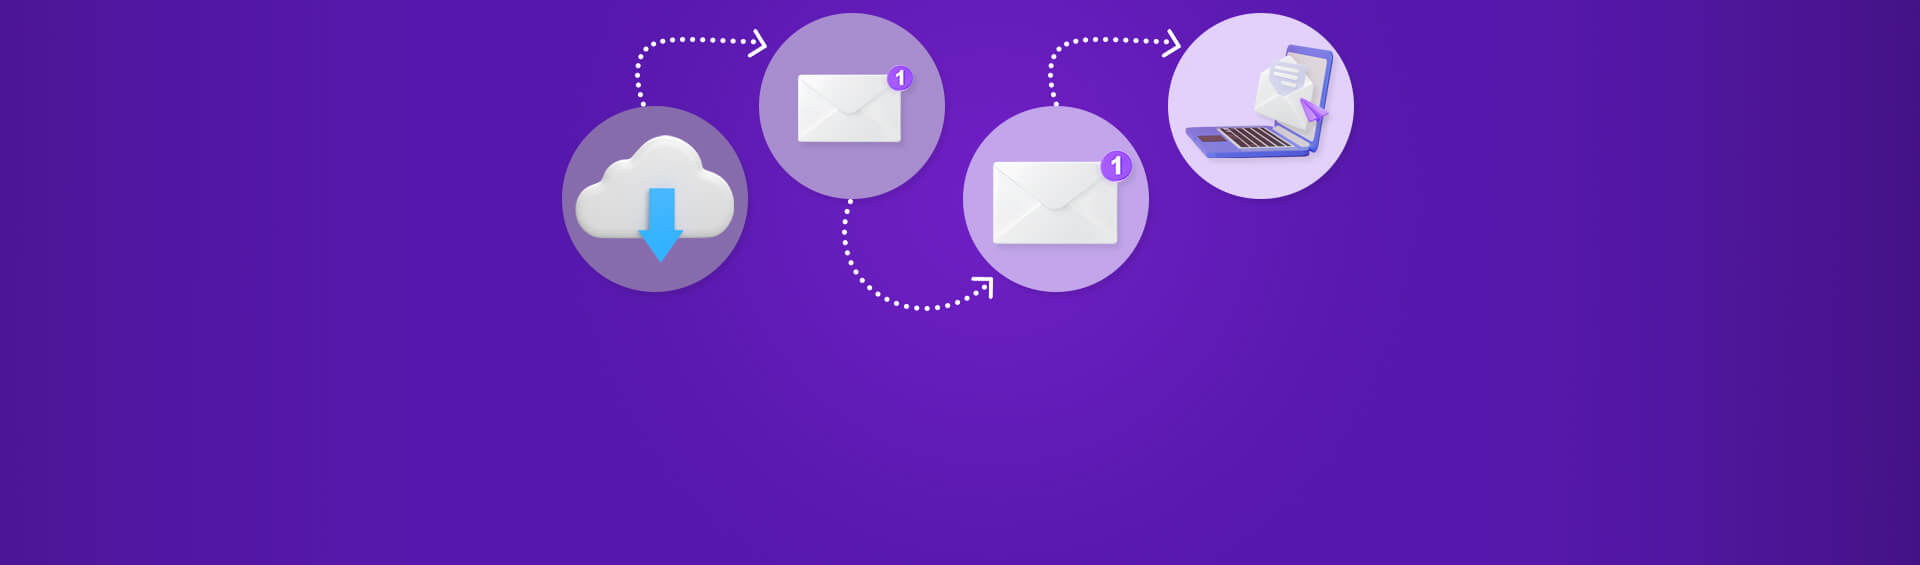 A Complete Guide to Creating an Email Nurture Campaign